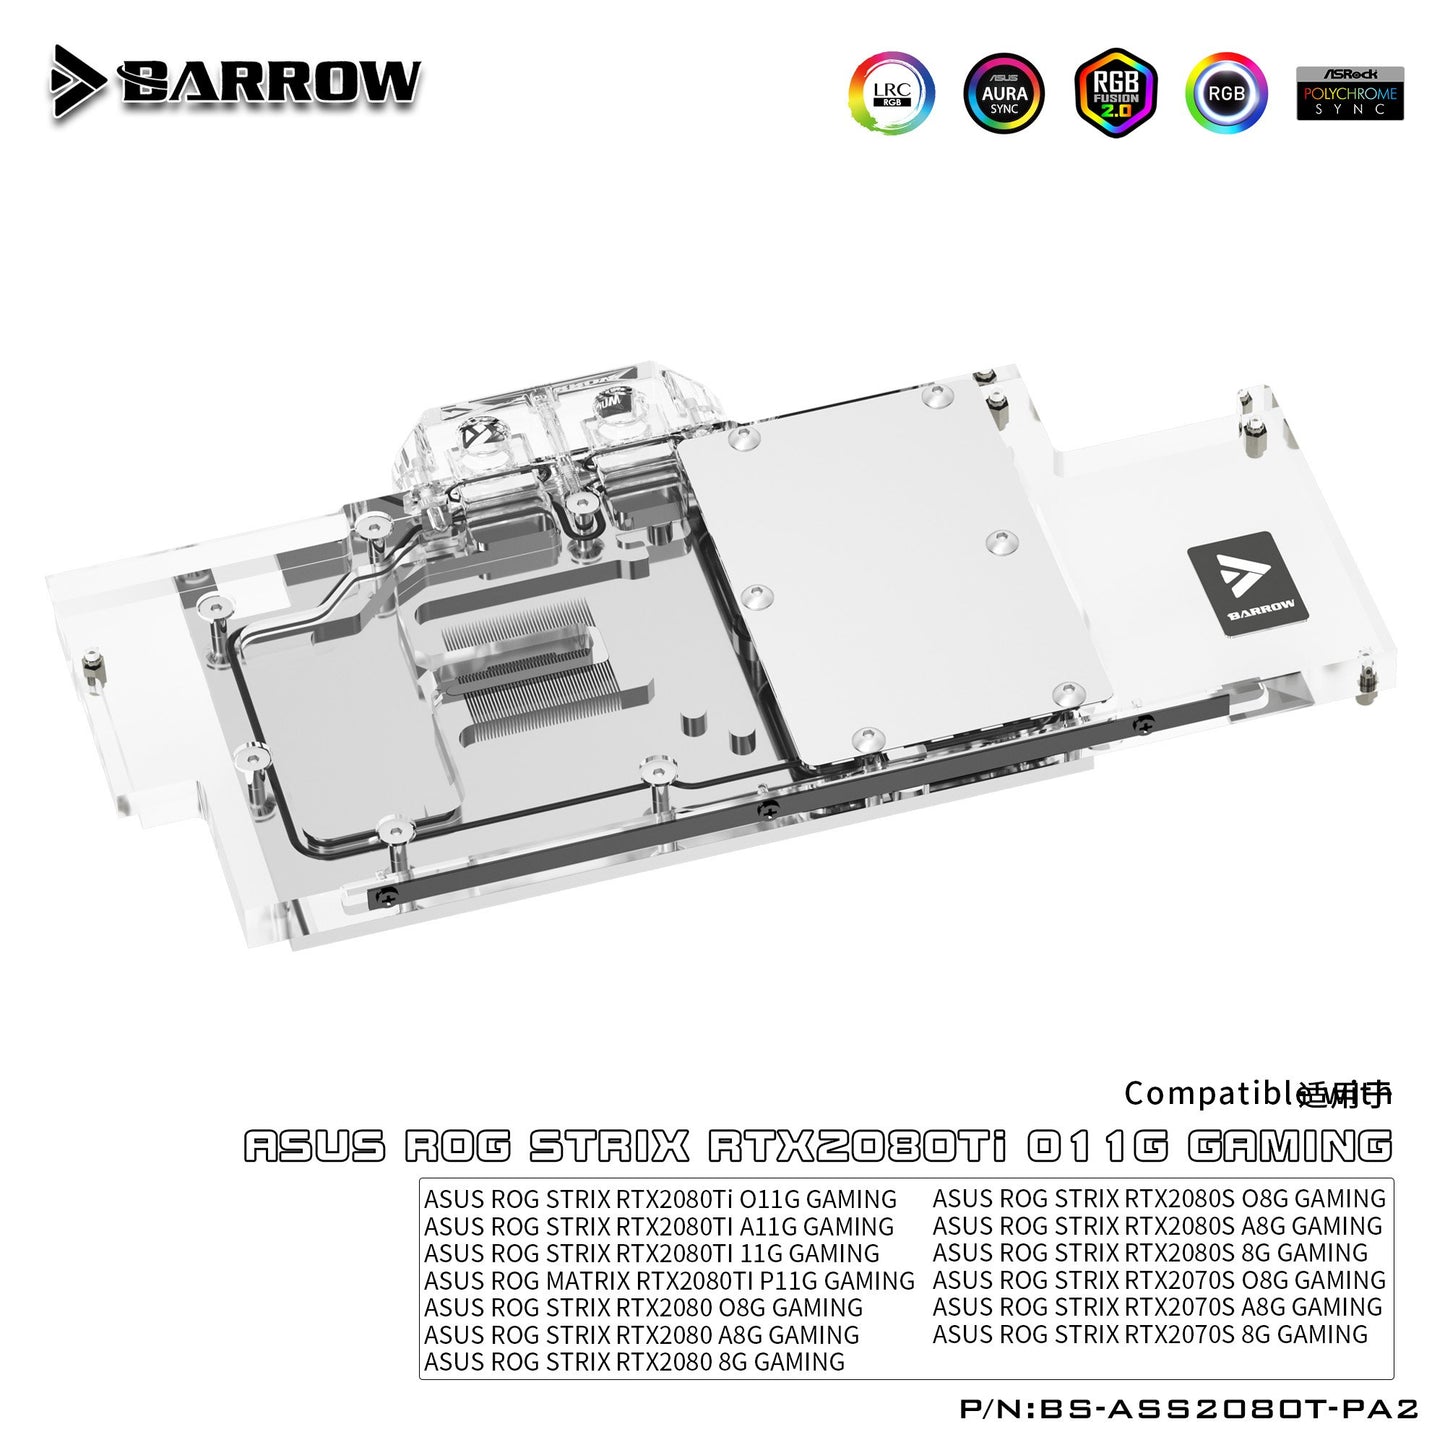 Barrow BS-ASS2080T-PA2, Full Coverage Graphics Card Water Cooling Block, For ASUS STRIX RTX2080Ti O11G/A11G,RTX2080/2080S/2070S